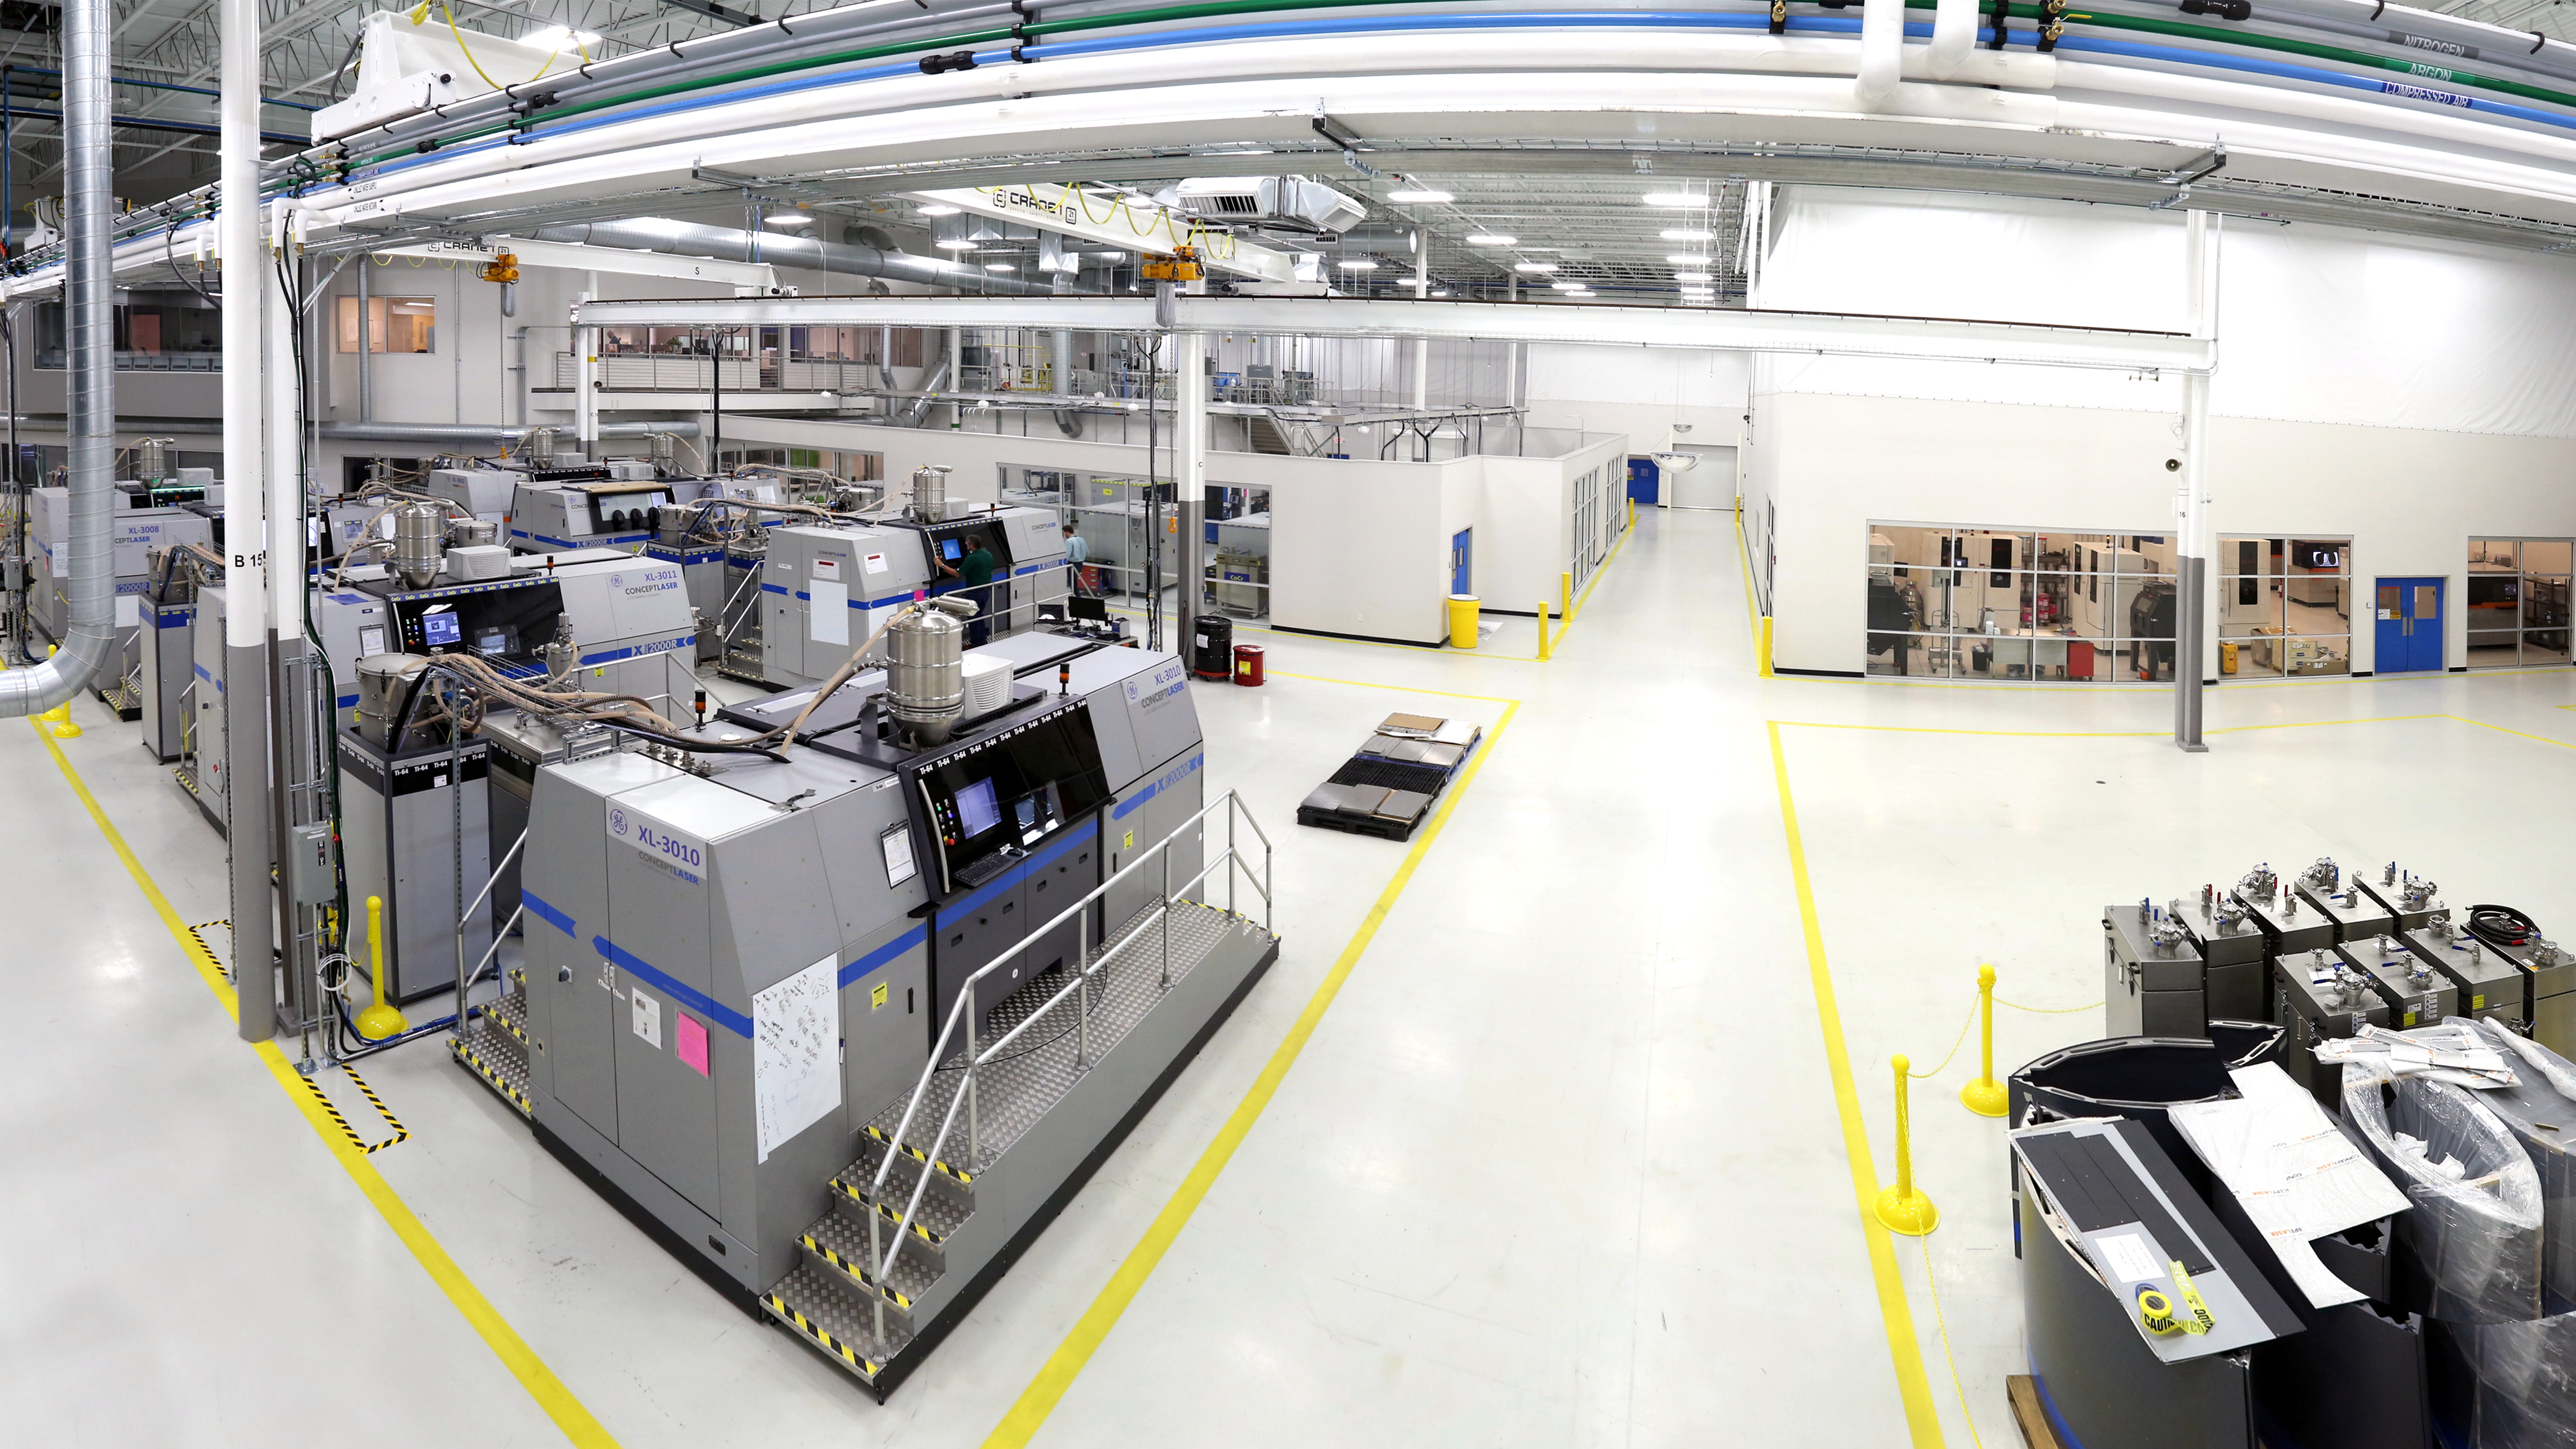 GE Aviation's Additive Technology Center. One of the world’s largest and most advanced 3D-printing and development centers